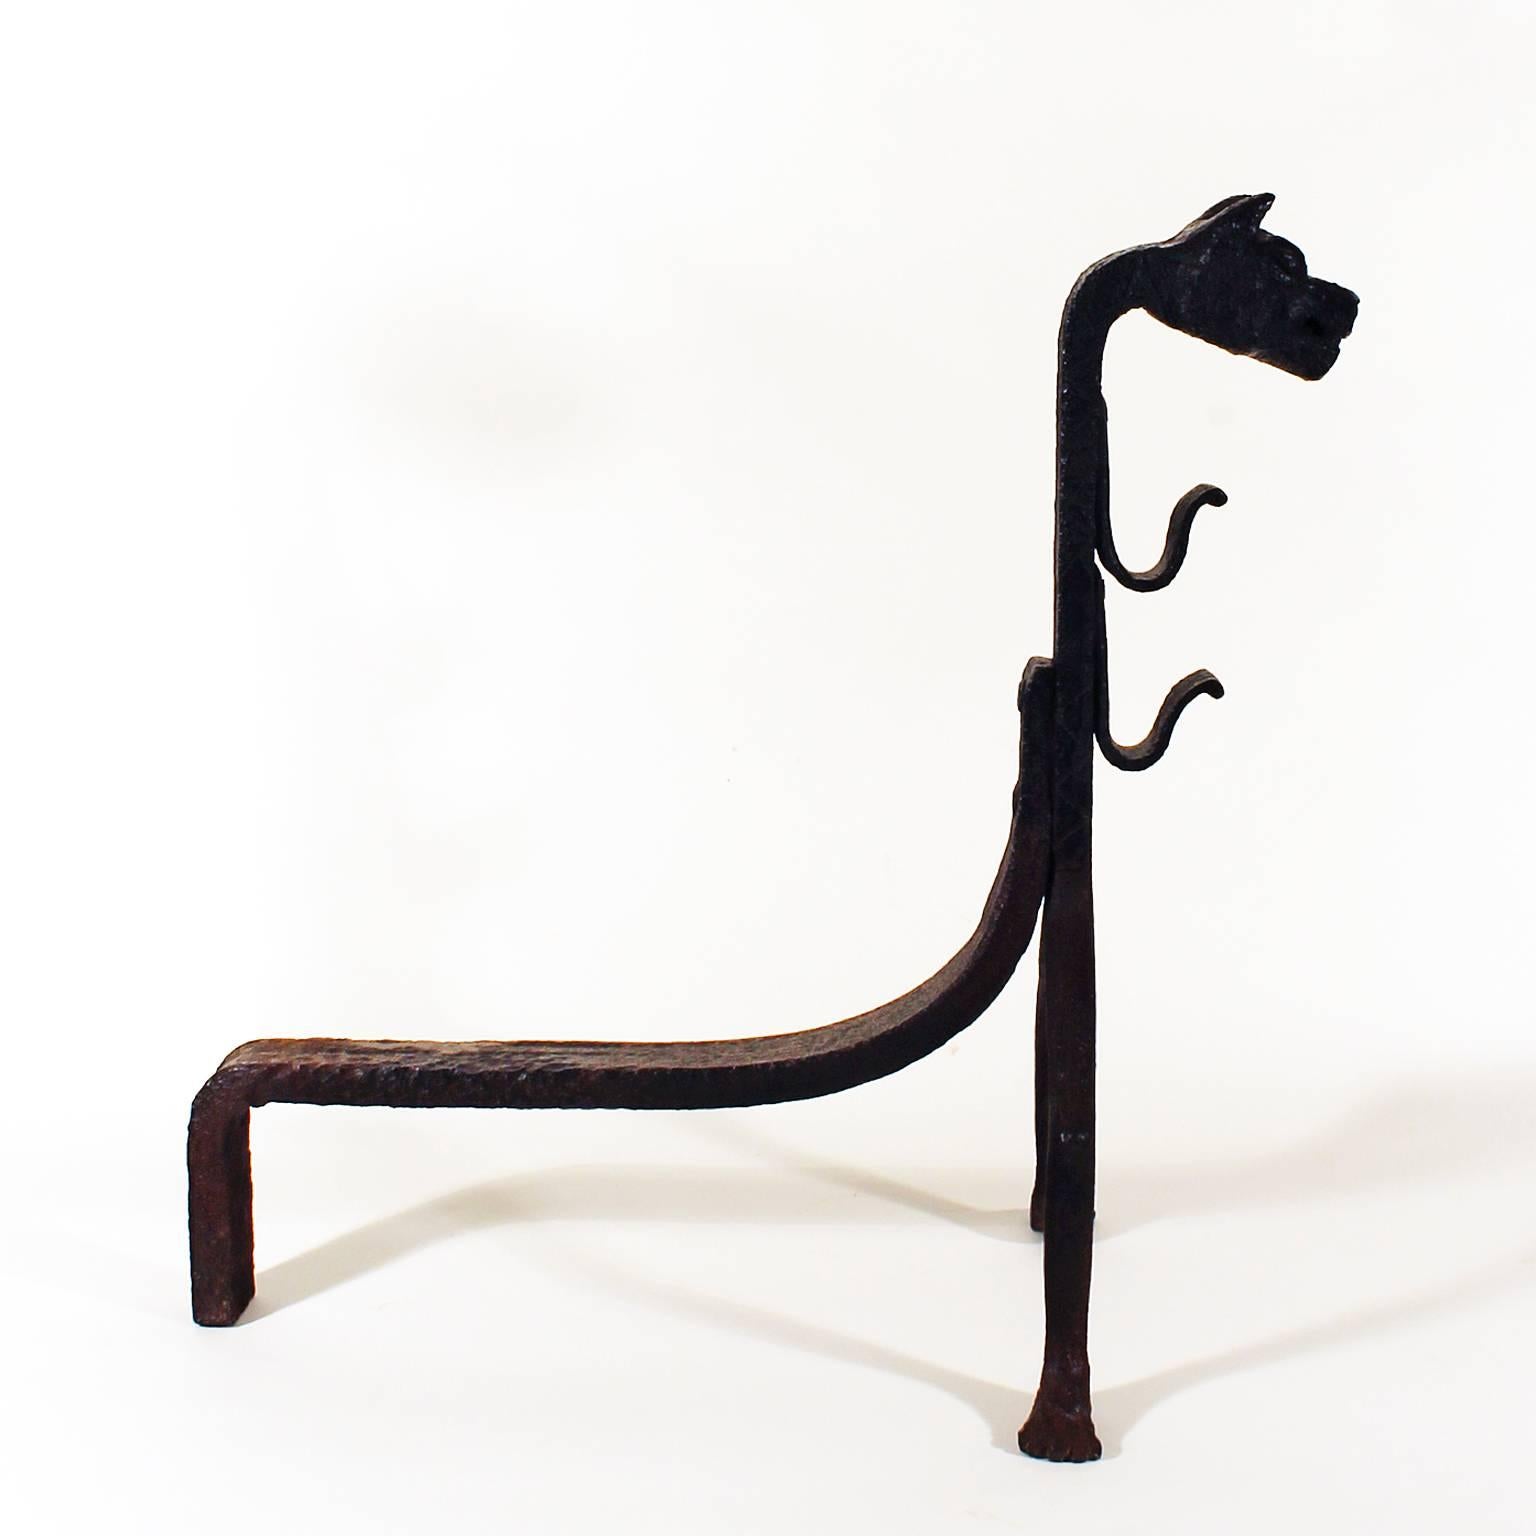 Catalan modernism pair of firedogs, completely realized in wrought iron in the 13th century style.
Design: Vicente Ibáñez Cotanda (signed).
Spain, Catalonia 1910-1920.

Vicente Ibáñez Cotanda was an important master blacksmith that worked